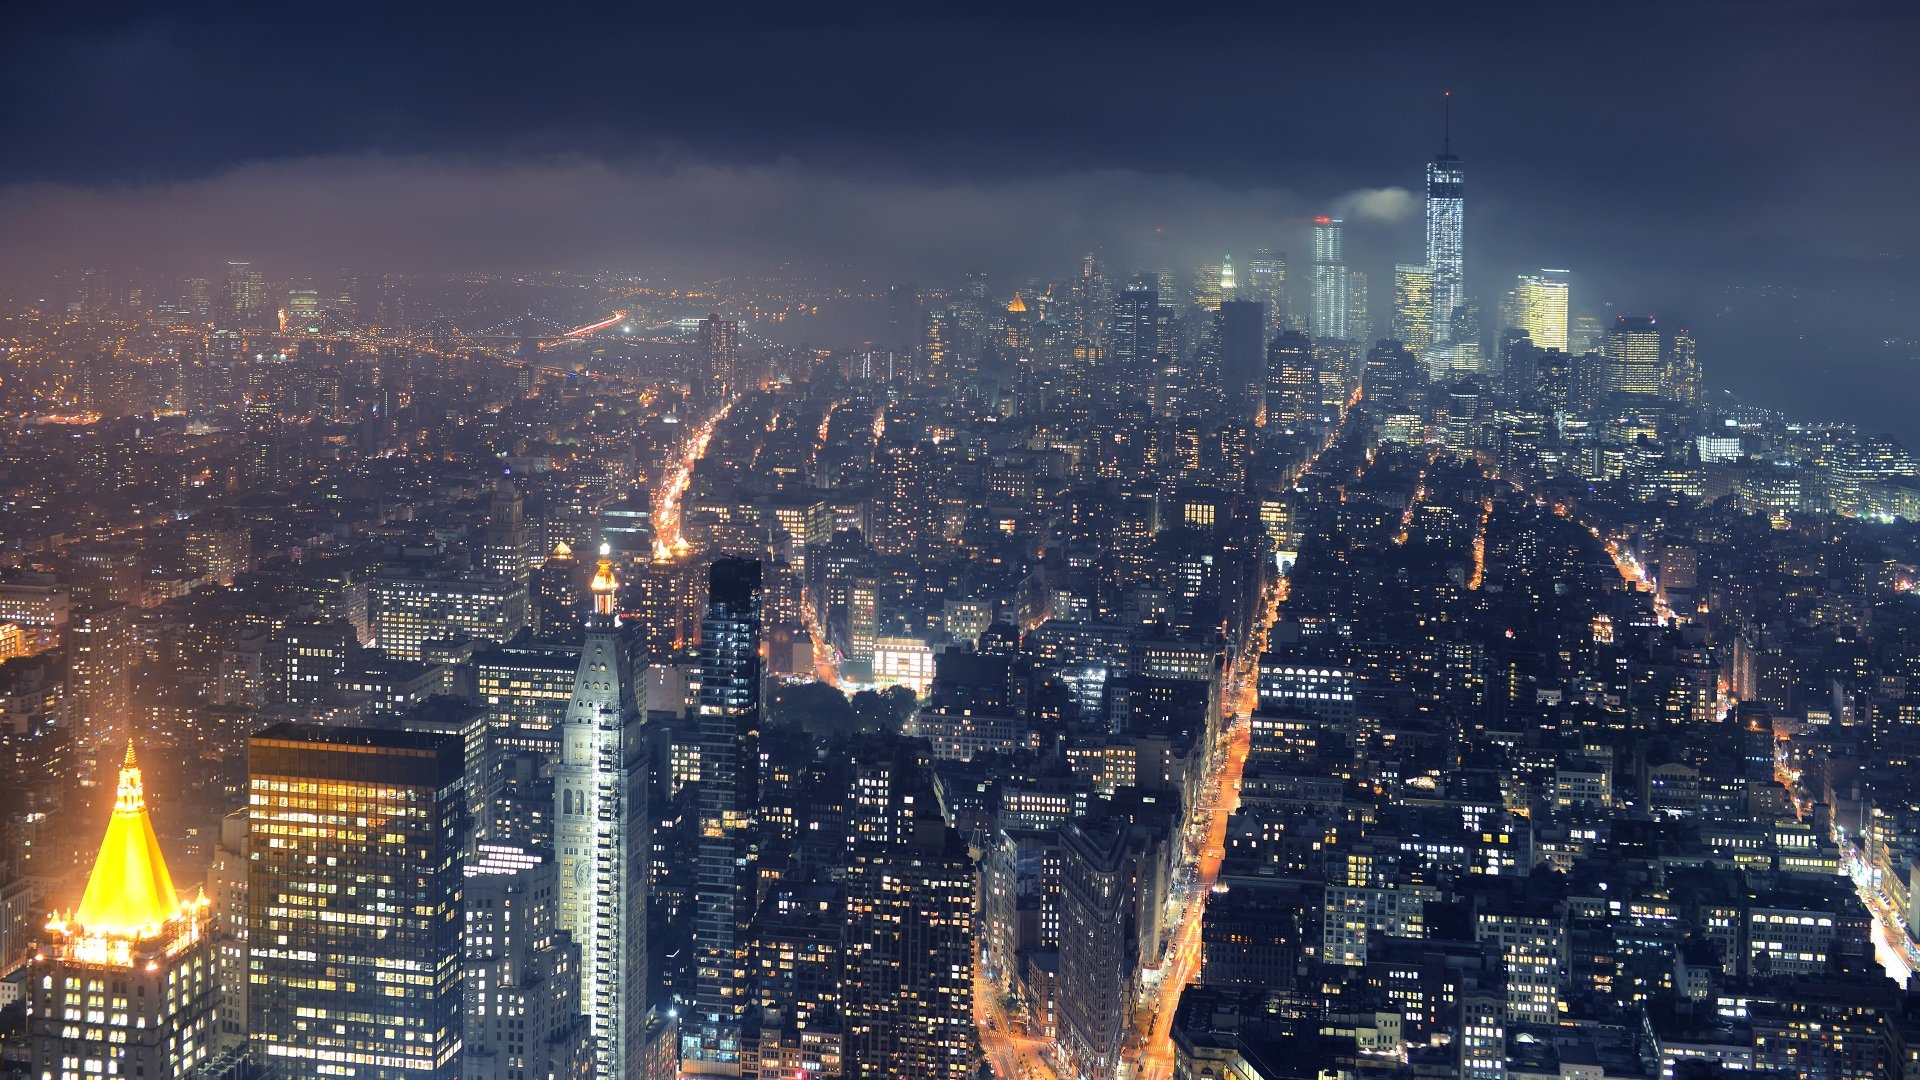 New York at Night, 4K wallpapers, Background images, 1920x1080 Full HD Desktop